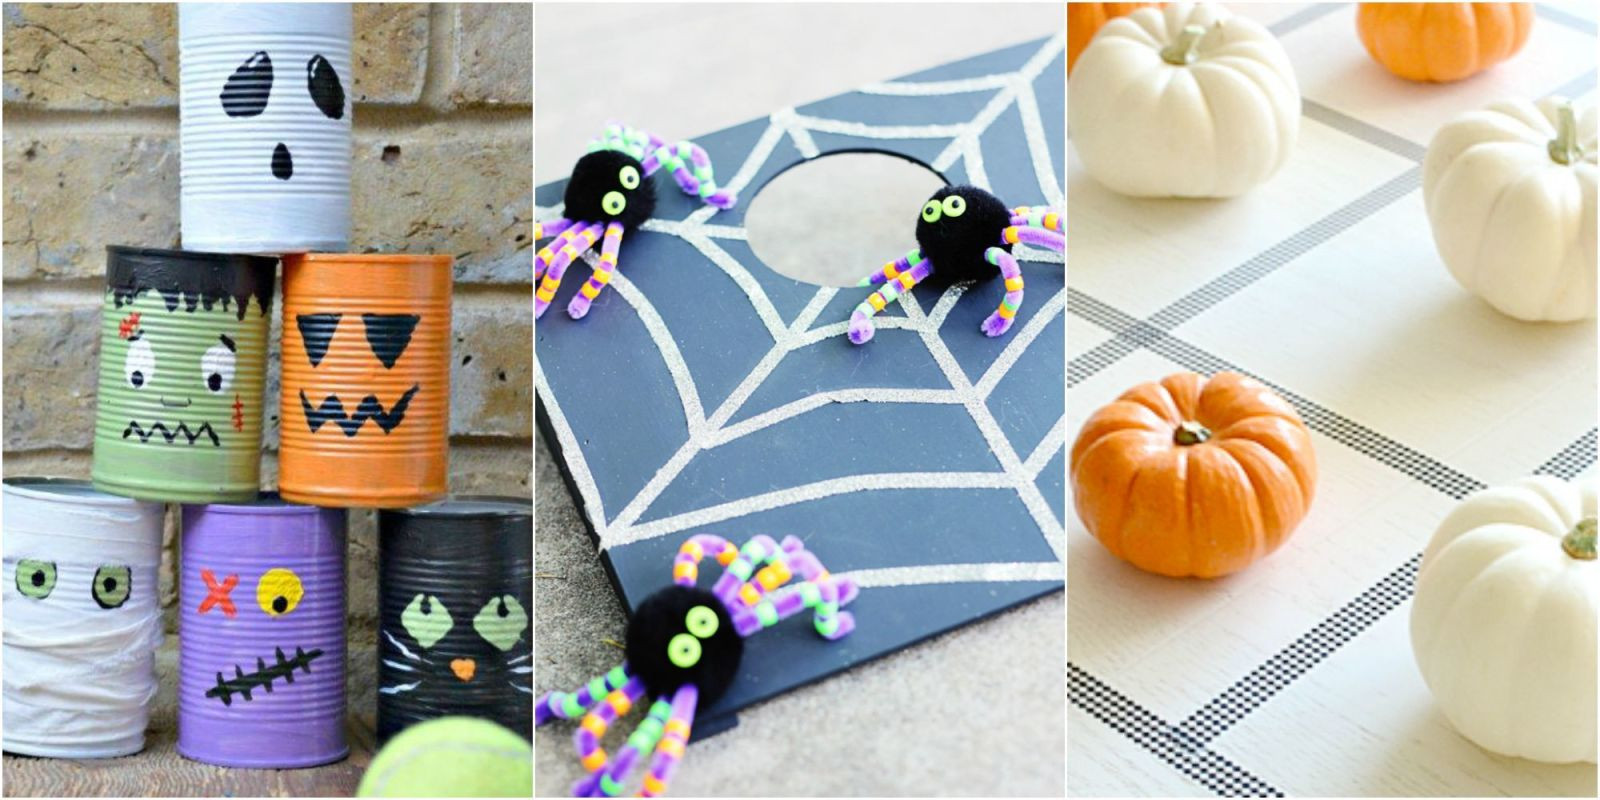 Ideas For Halloween Party Games
 25 Halloween Games For Your 2016 Halloween Party DIY